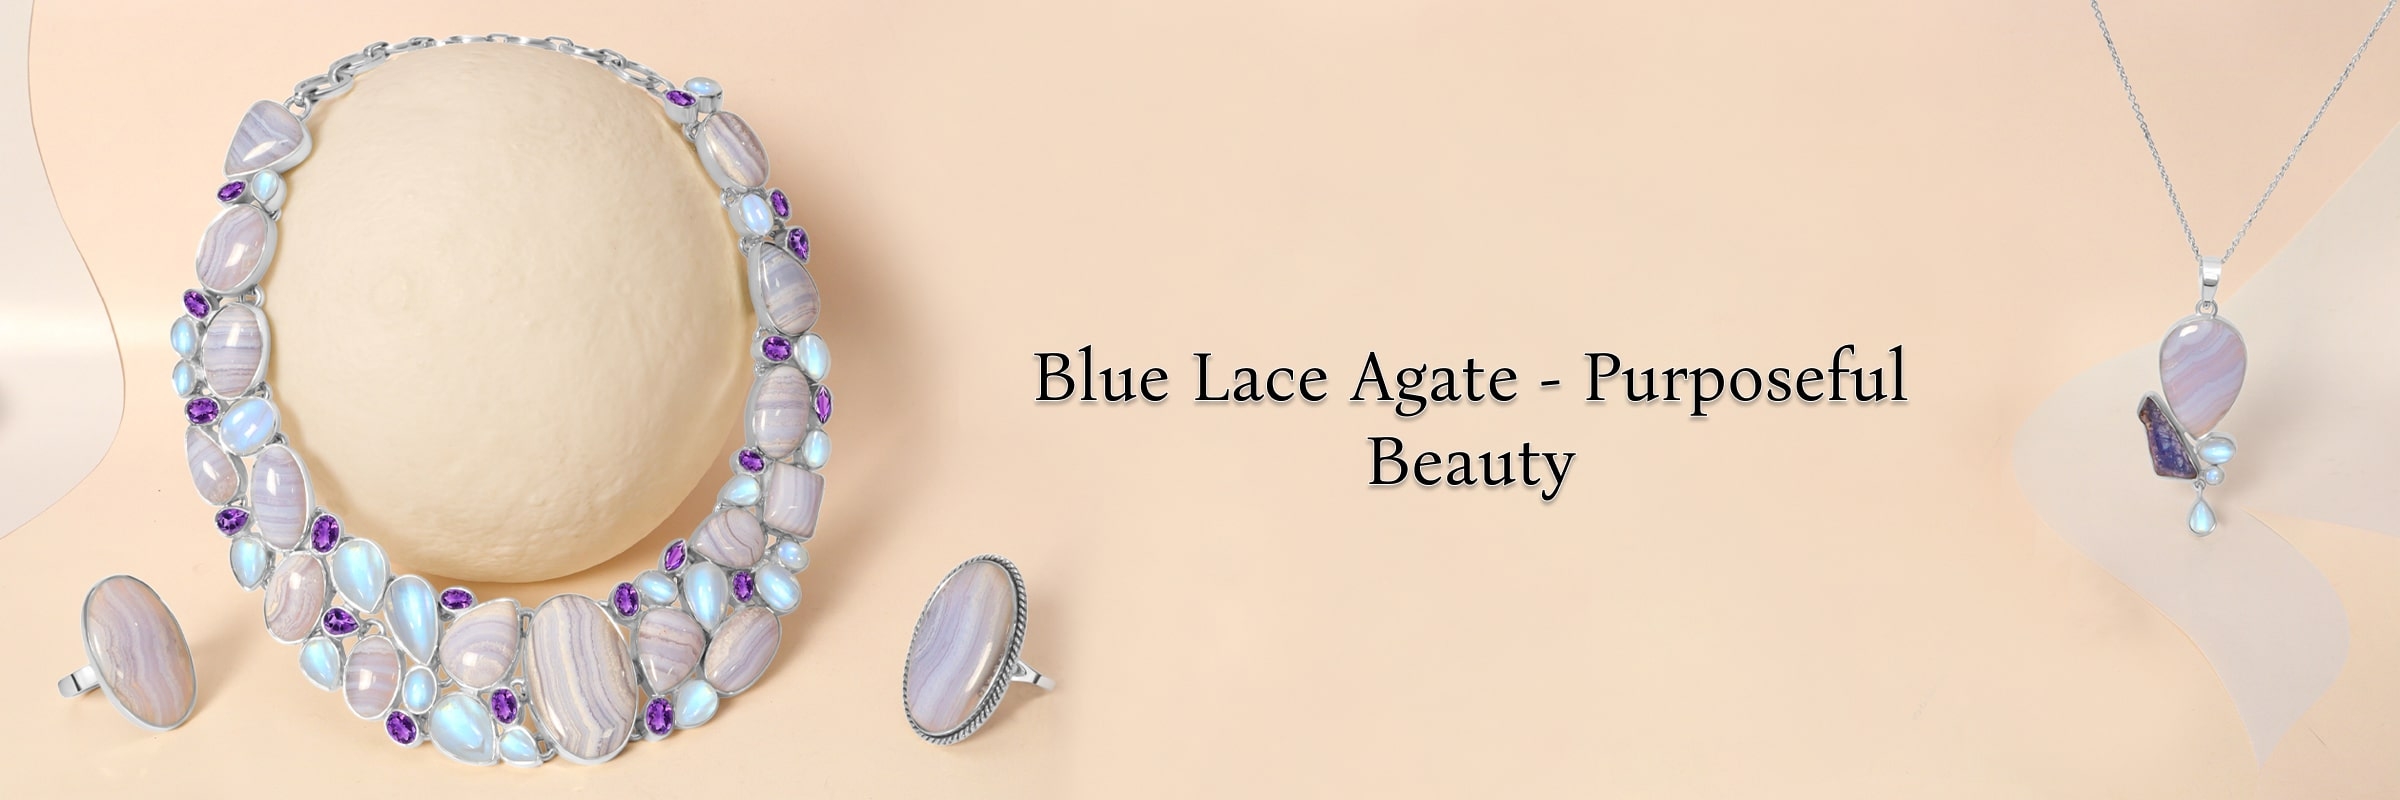 Uses of Blue Lace Agate Gem